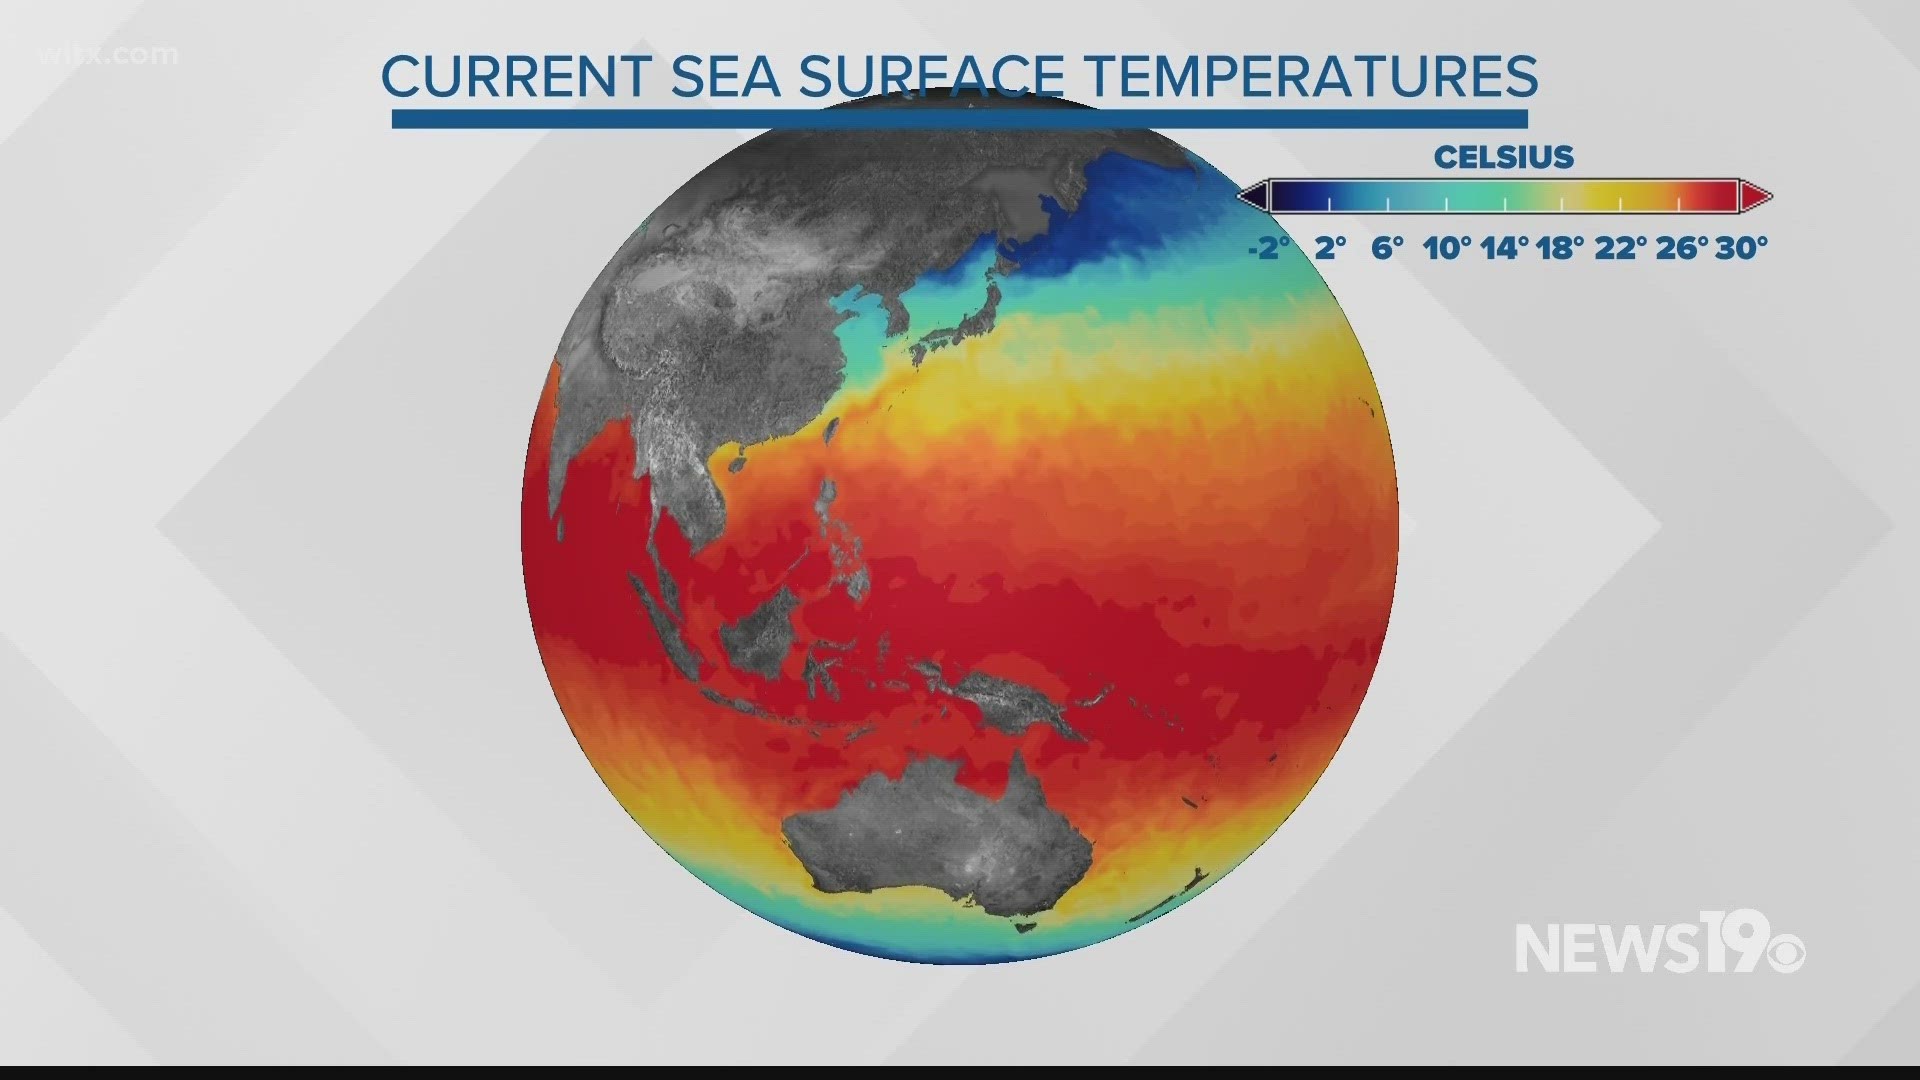 Temperatures in oceans across the globe have surpassed 2016. 2016 is regarded as the hottest year on record in the modern-era.